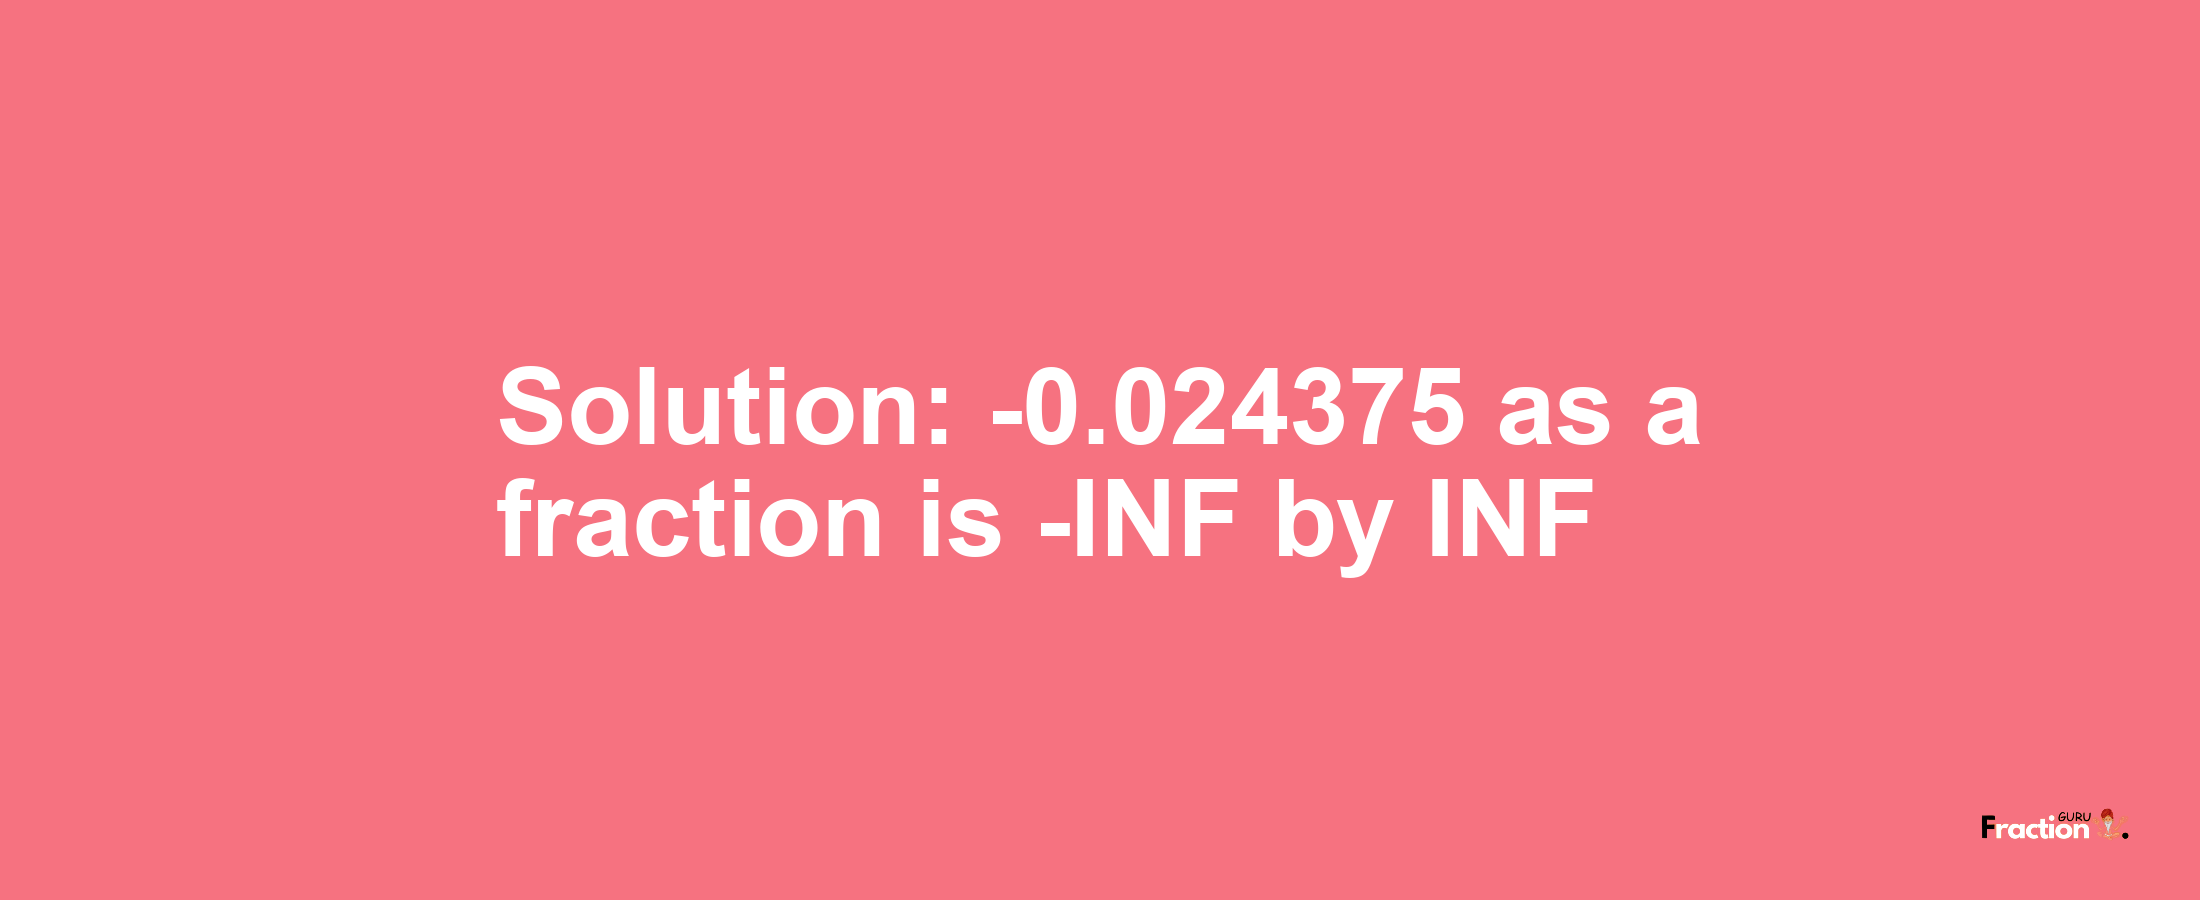 Solution:-0.024375 as a fraction is -INF/INF